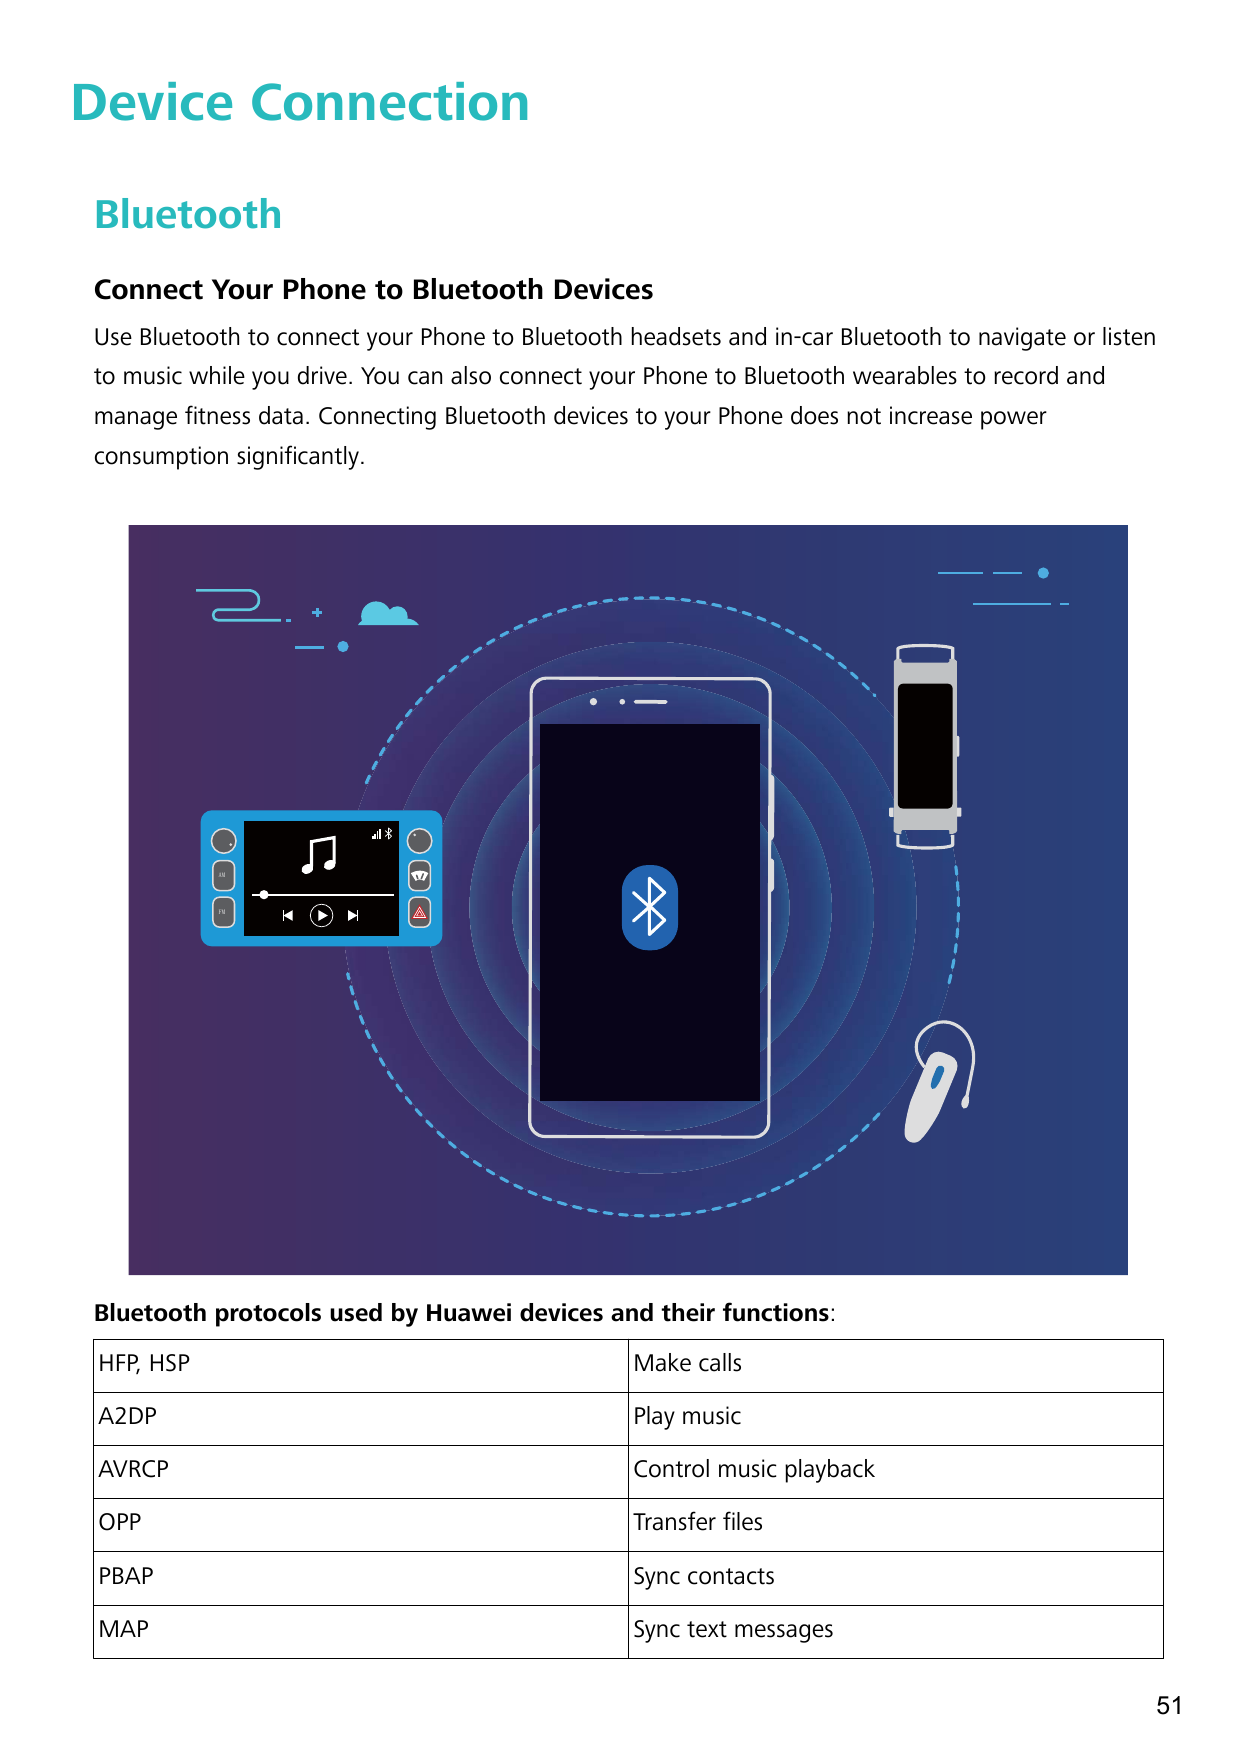 Device ConnectionBluetoothConnect Your Phone to Bluetooth DevicesUse Bluetooth to connect your Phone to Bluetooth headsets and i